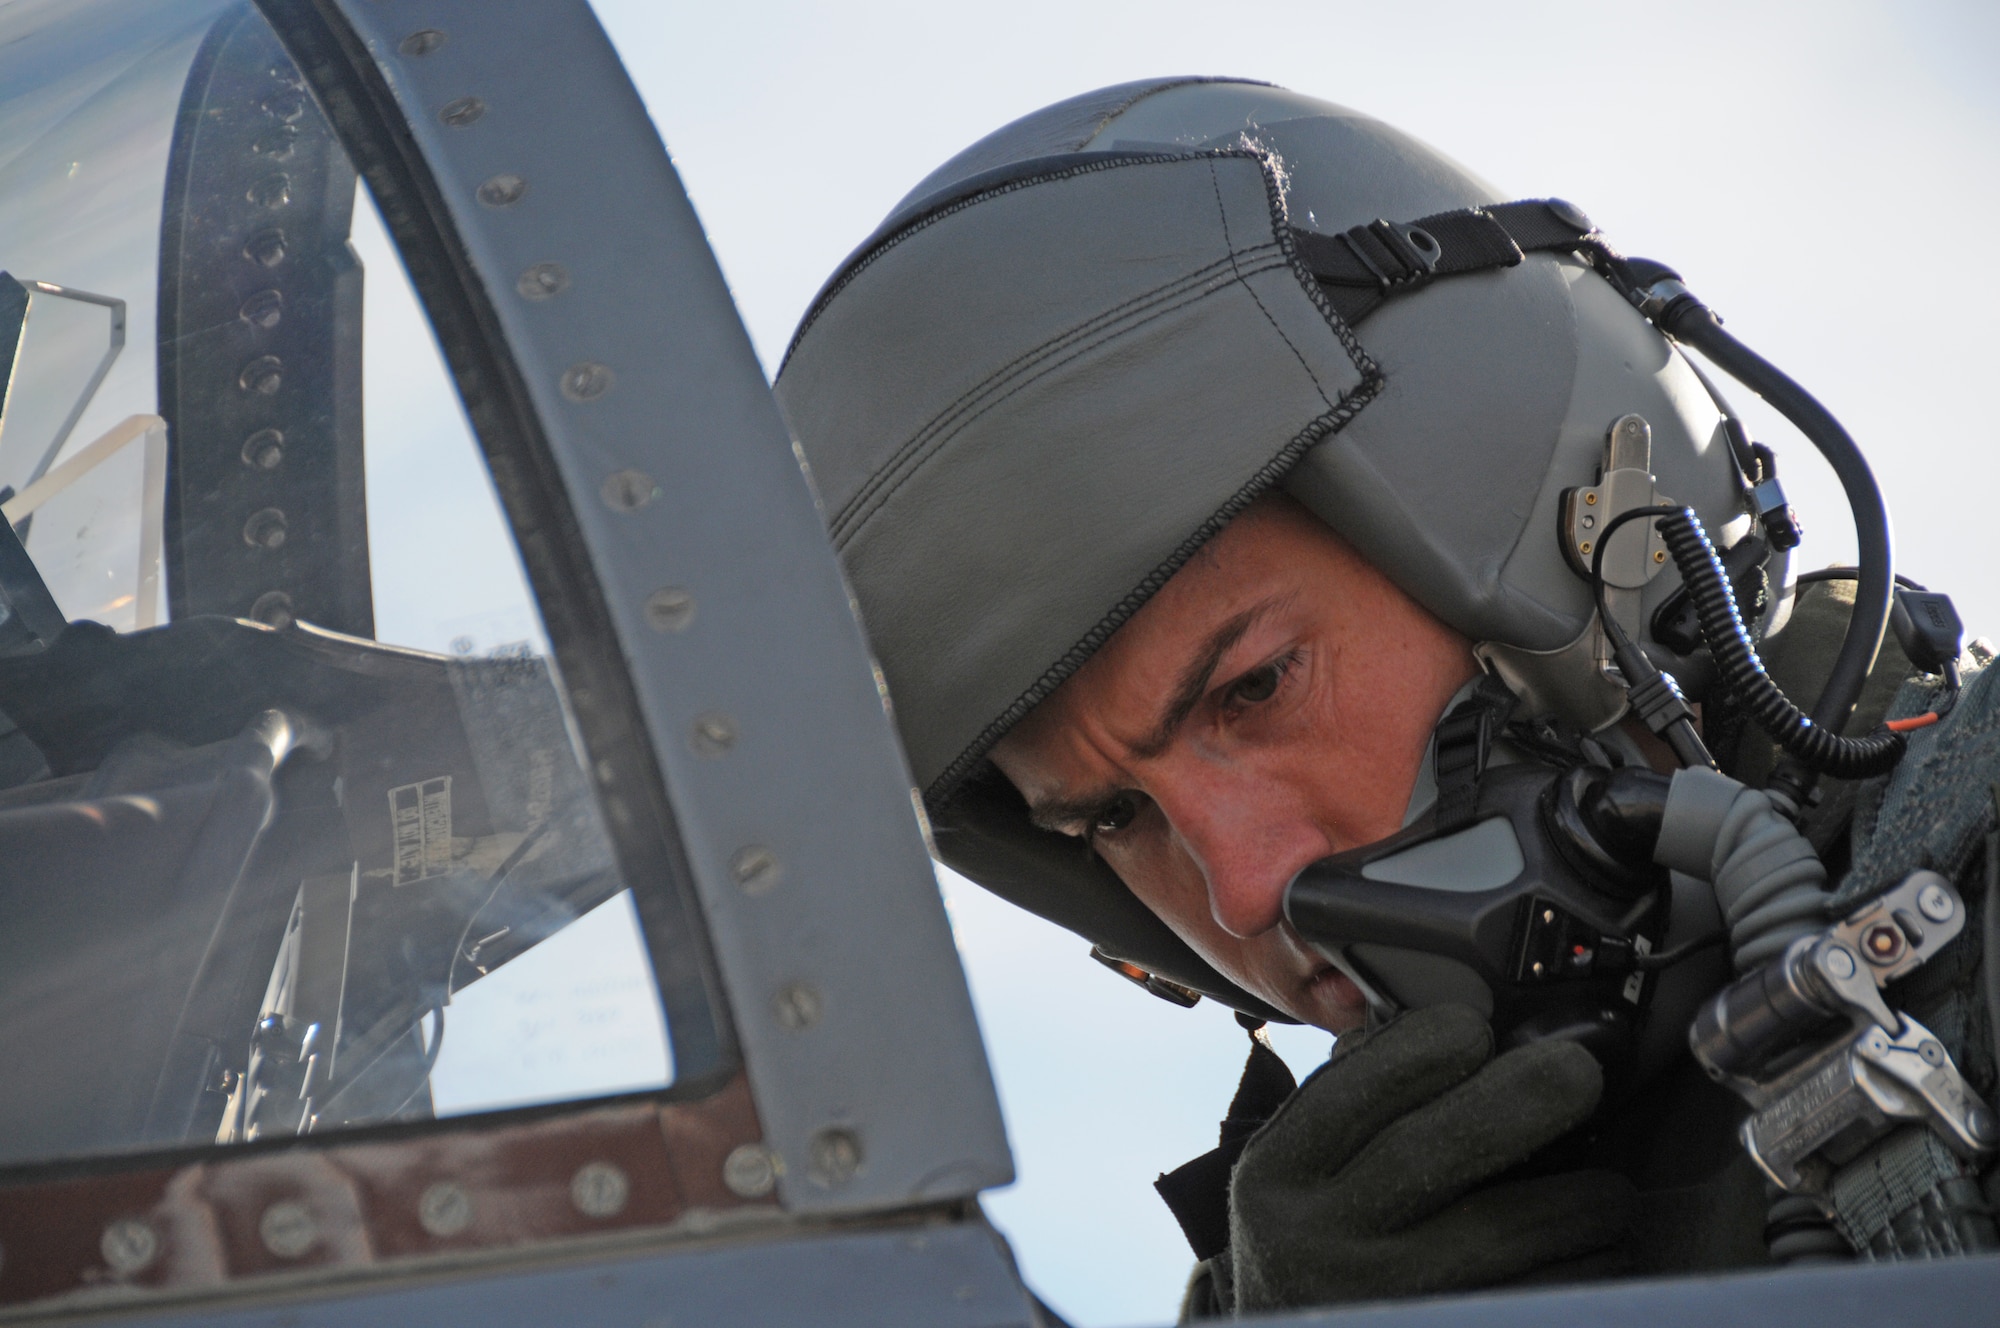 U.S. Air Force Capt. Alexander Frank, F-15 student pilot, runs through the startup procedures in preparation for his check ride in the F-15 Eagle Jan. 27, 2016 at Kingsley Field in Klamath Falls, Ore.  During this flight, Frank had to demonstrate his ability to fly in inclement weather using the aircraft instruments.  (U.S. Air National Guard photo by Tech. Sgt. Jefferson Thompson/released)